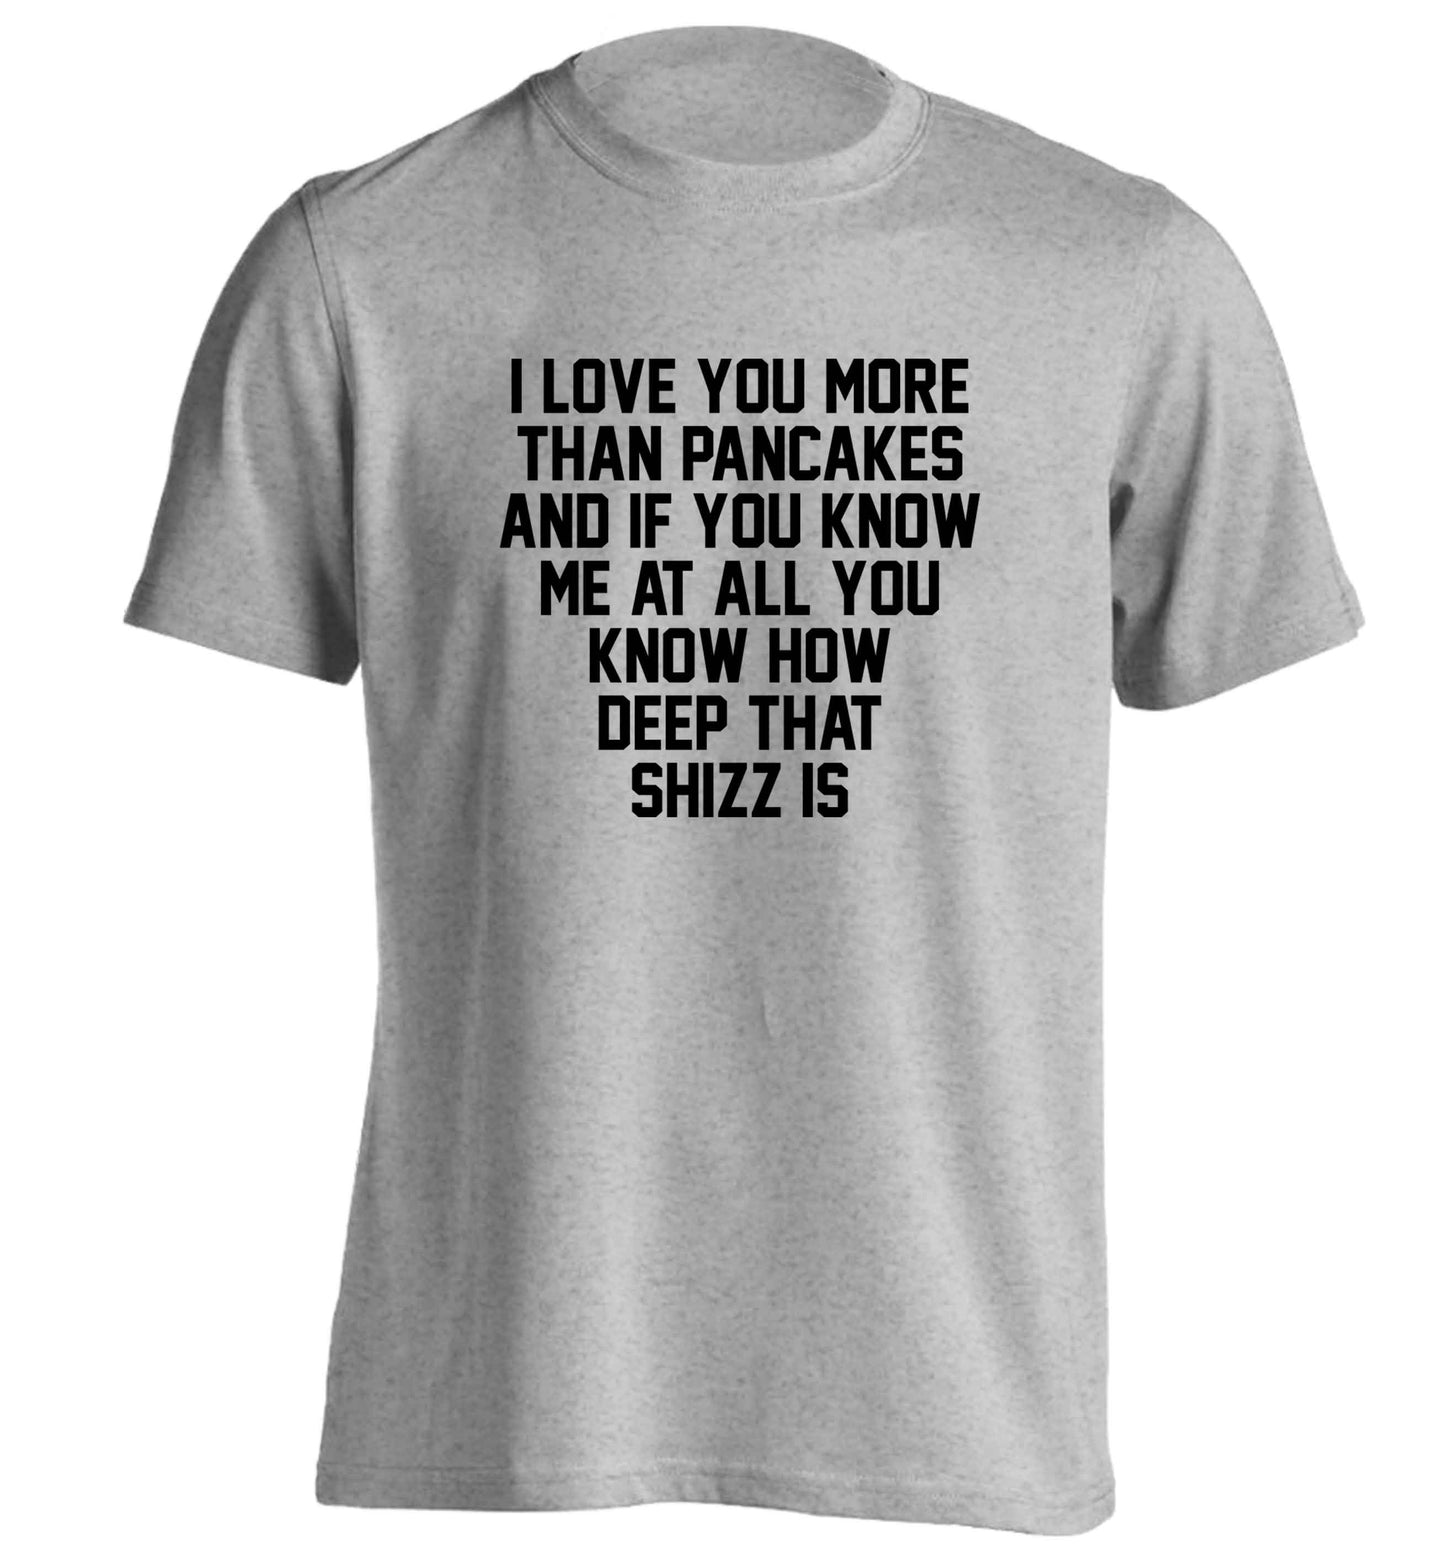 I love you more than pancakes and if you know me at all you know how deep that shizz is adults unisex grey Tshirt 2XL